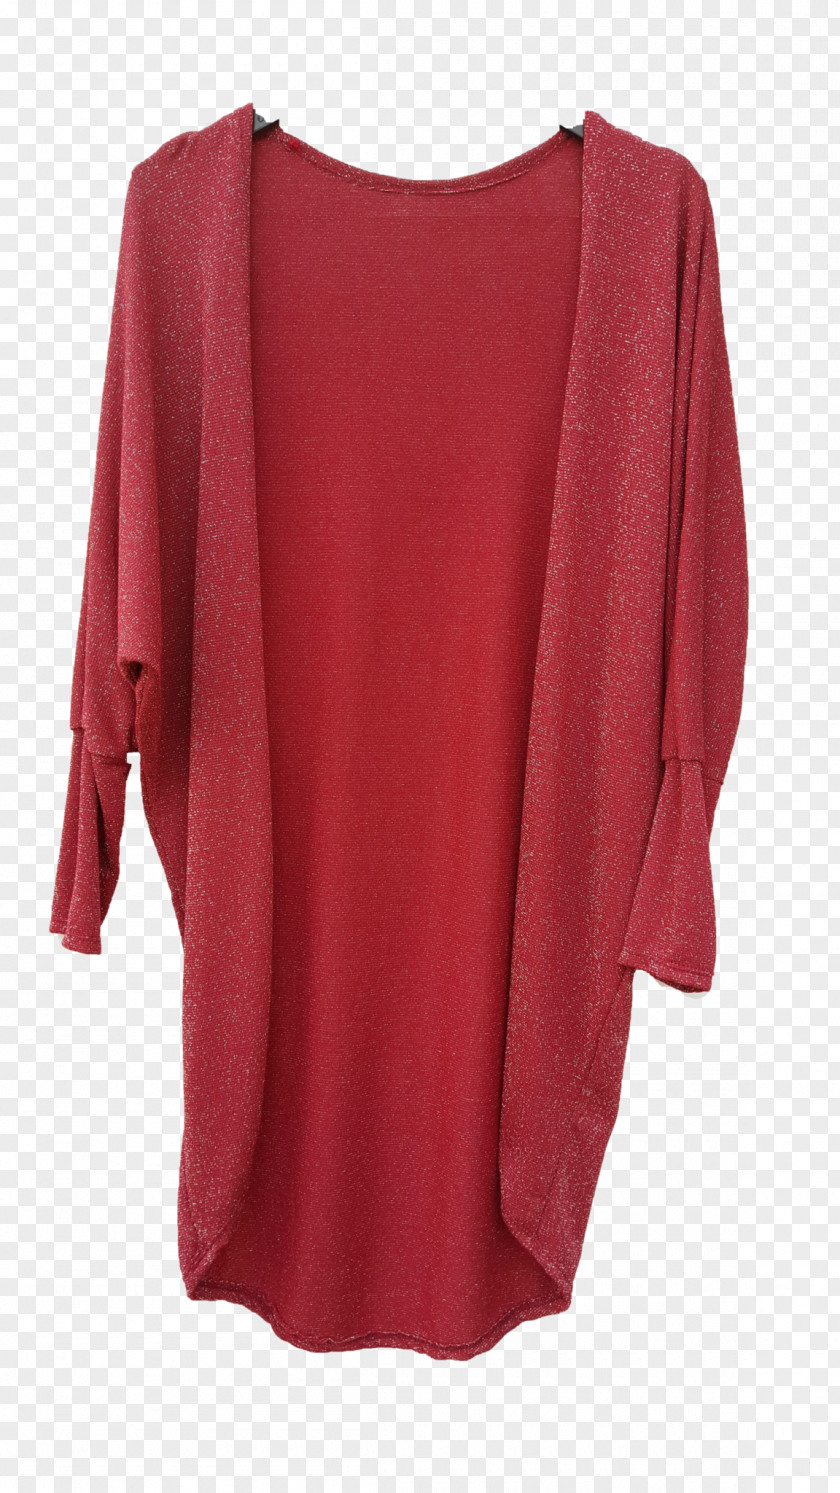 Be Yourself Fashionnl Shoulder Sleeve Maroon PNG